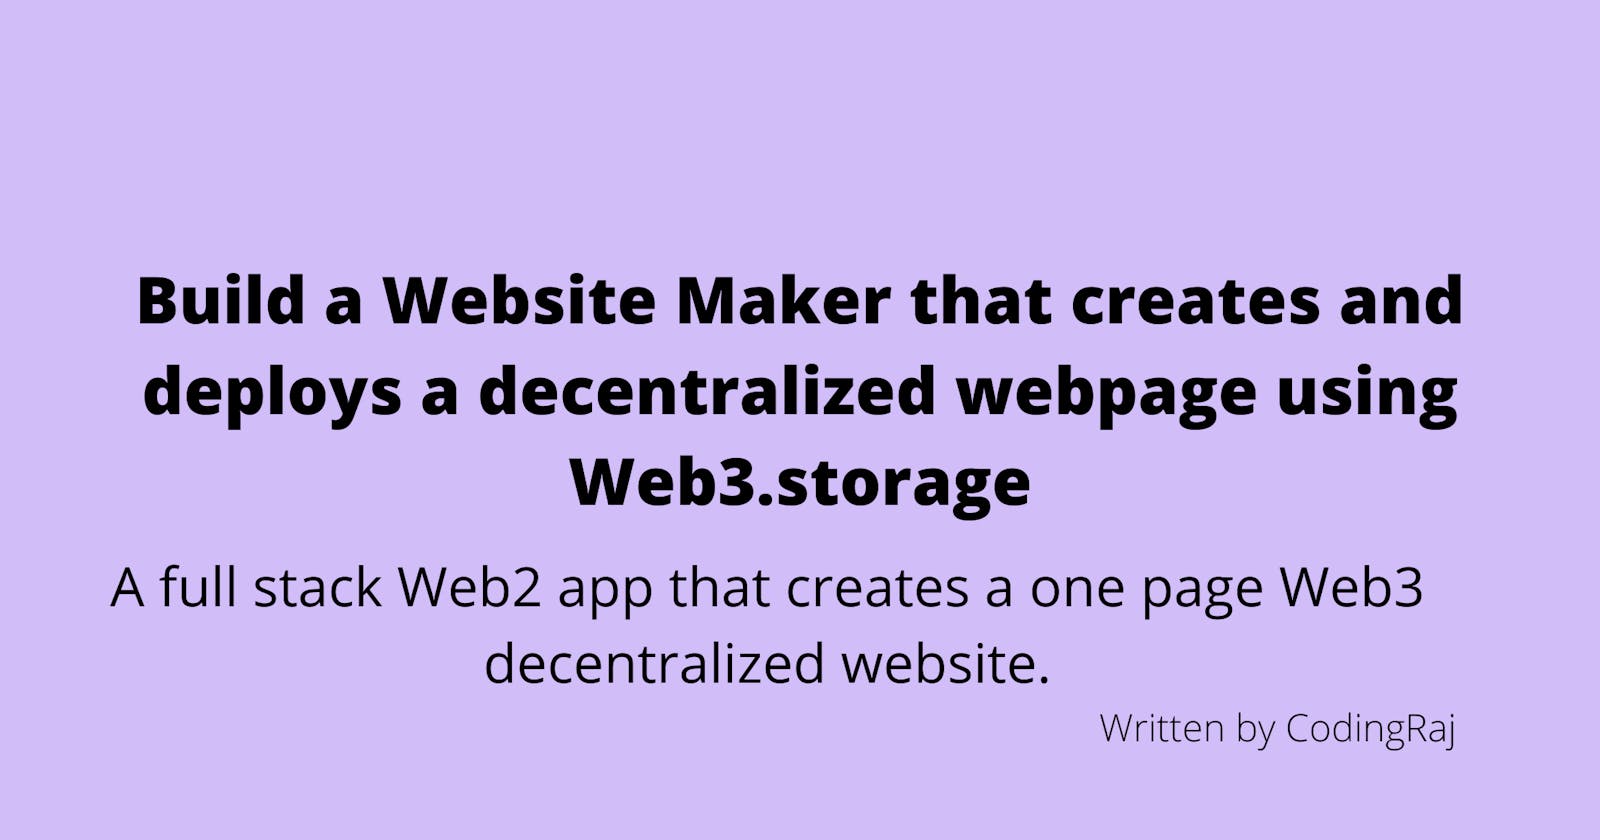 Build a Website Maker that creates and deploys a decentralized webpage using Web3.storage